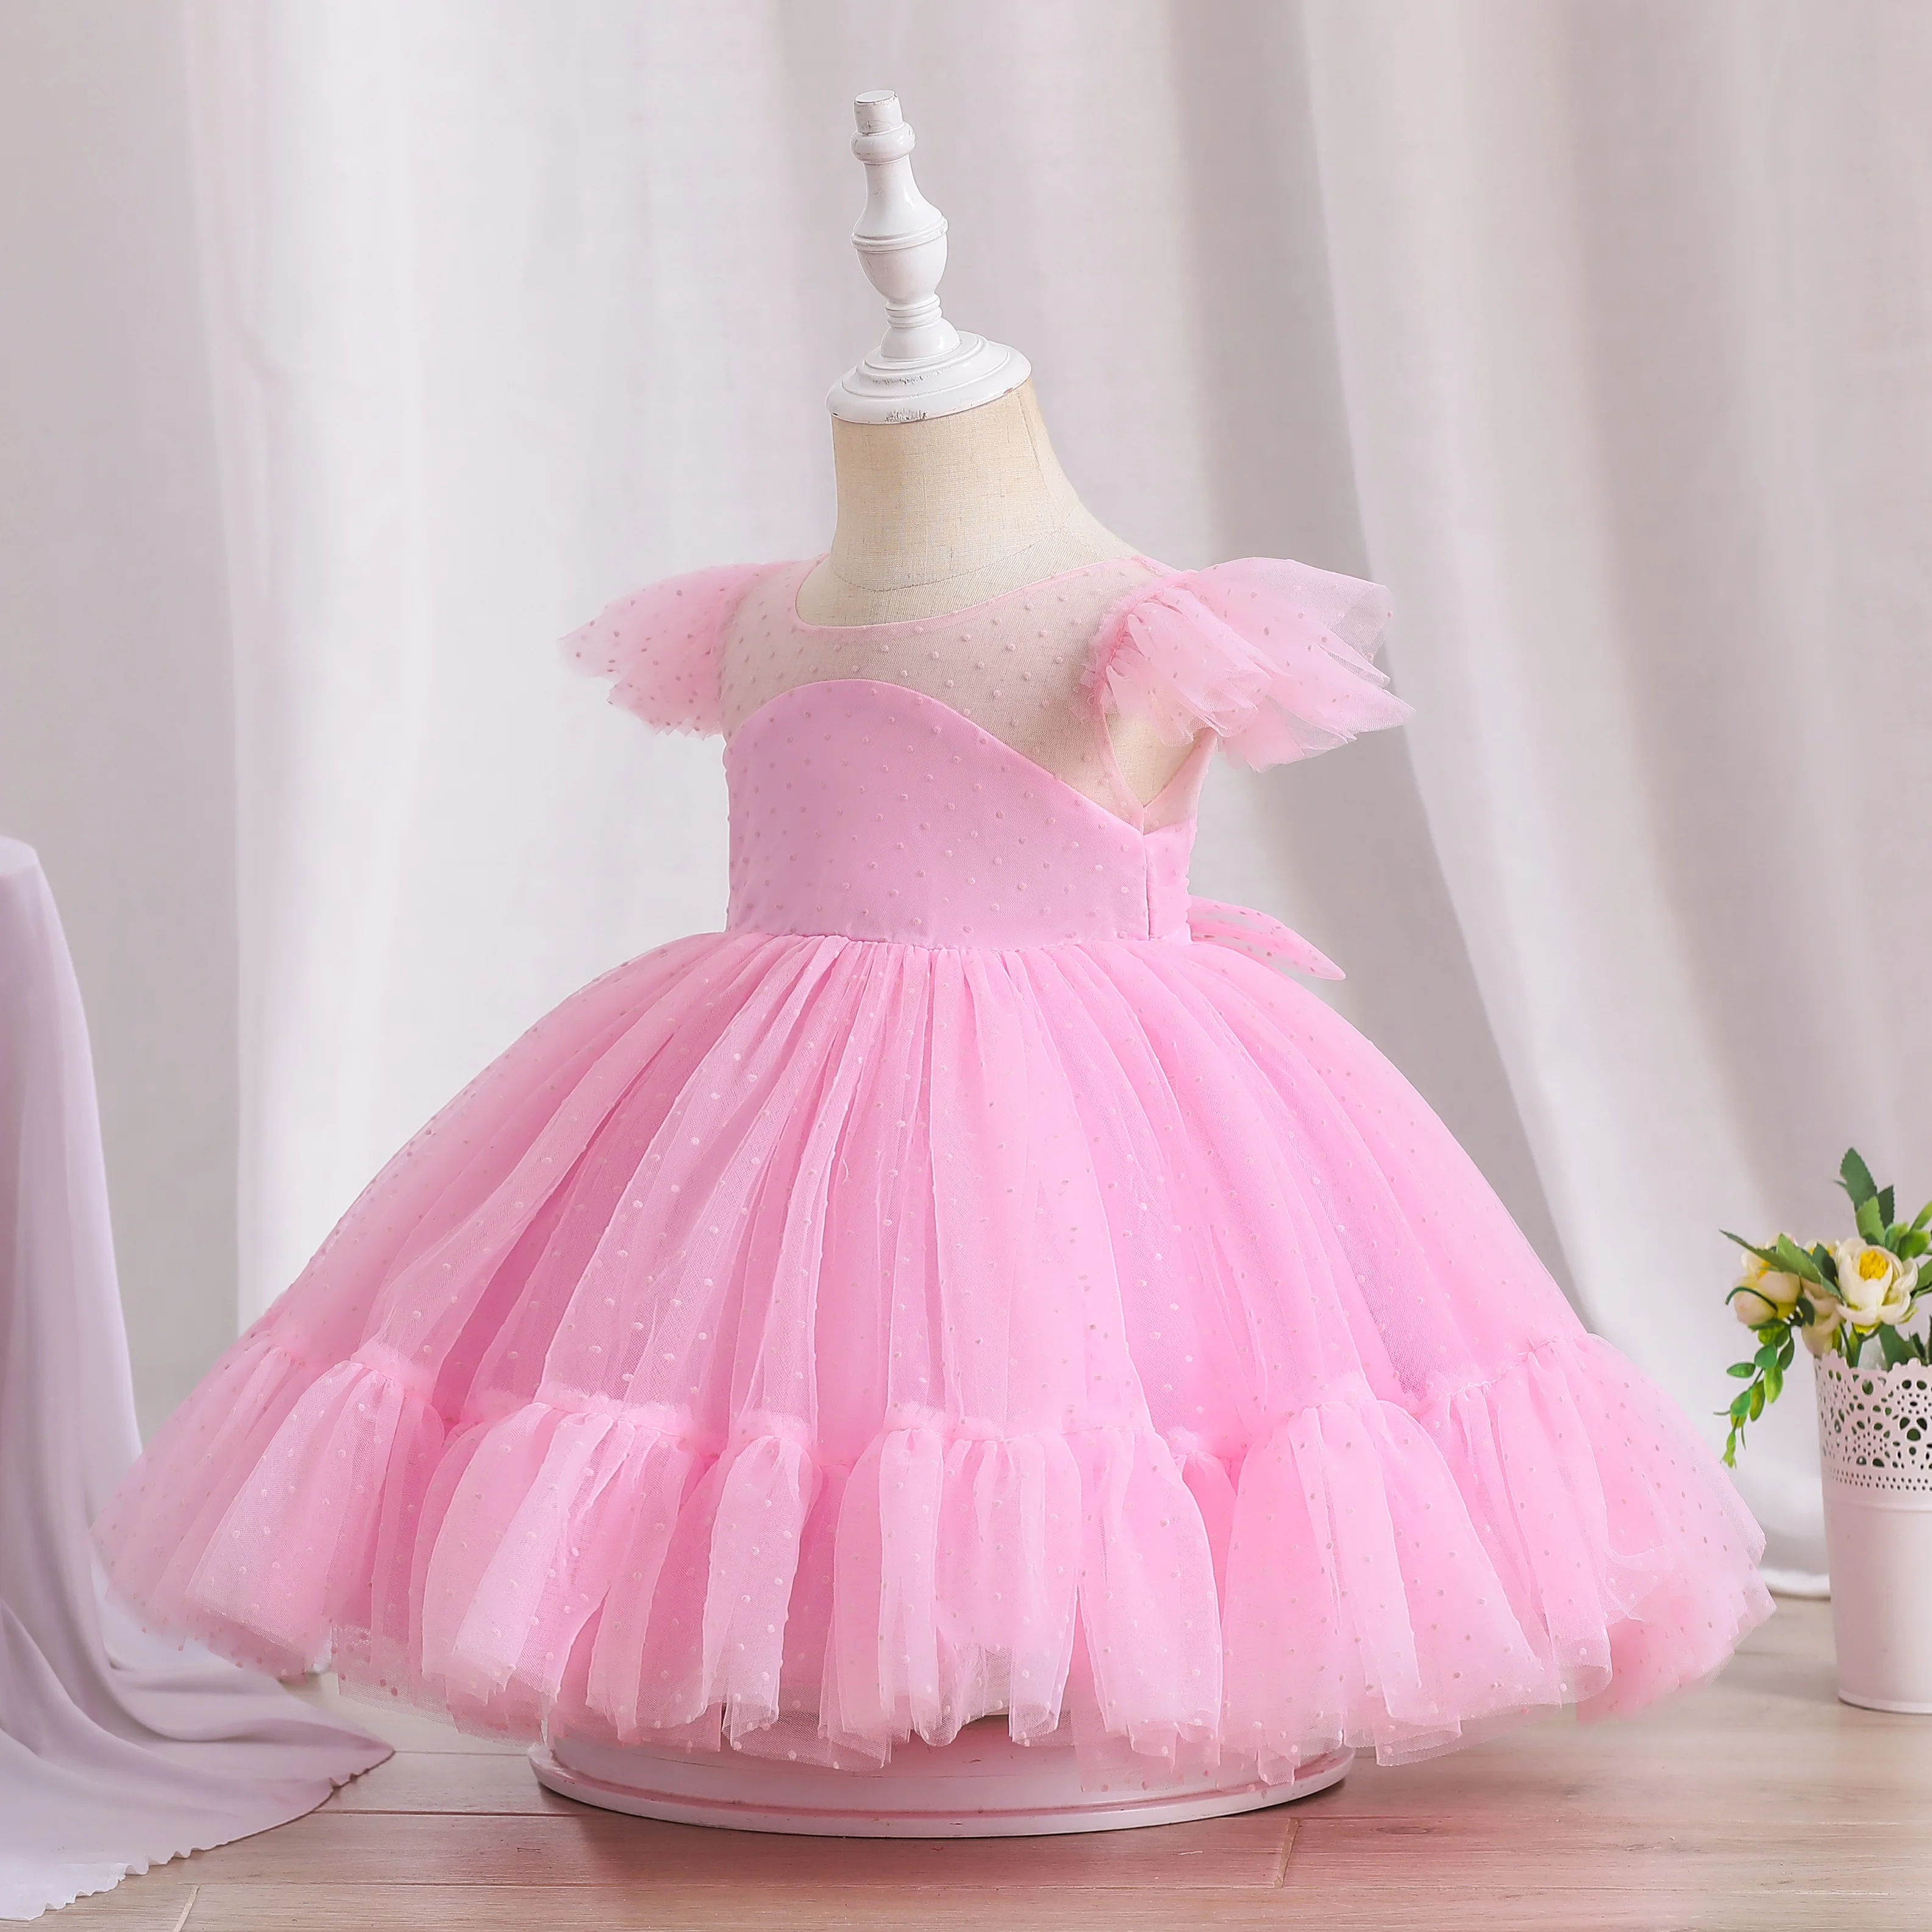 Summer Princess Girl Tutu Dress Party Wedding Birthday Dresses For Girl Polka Dots Costumes Kids Clothes Size 4 6 8 10 Years